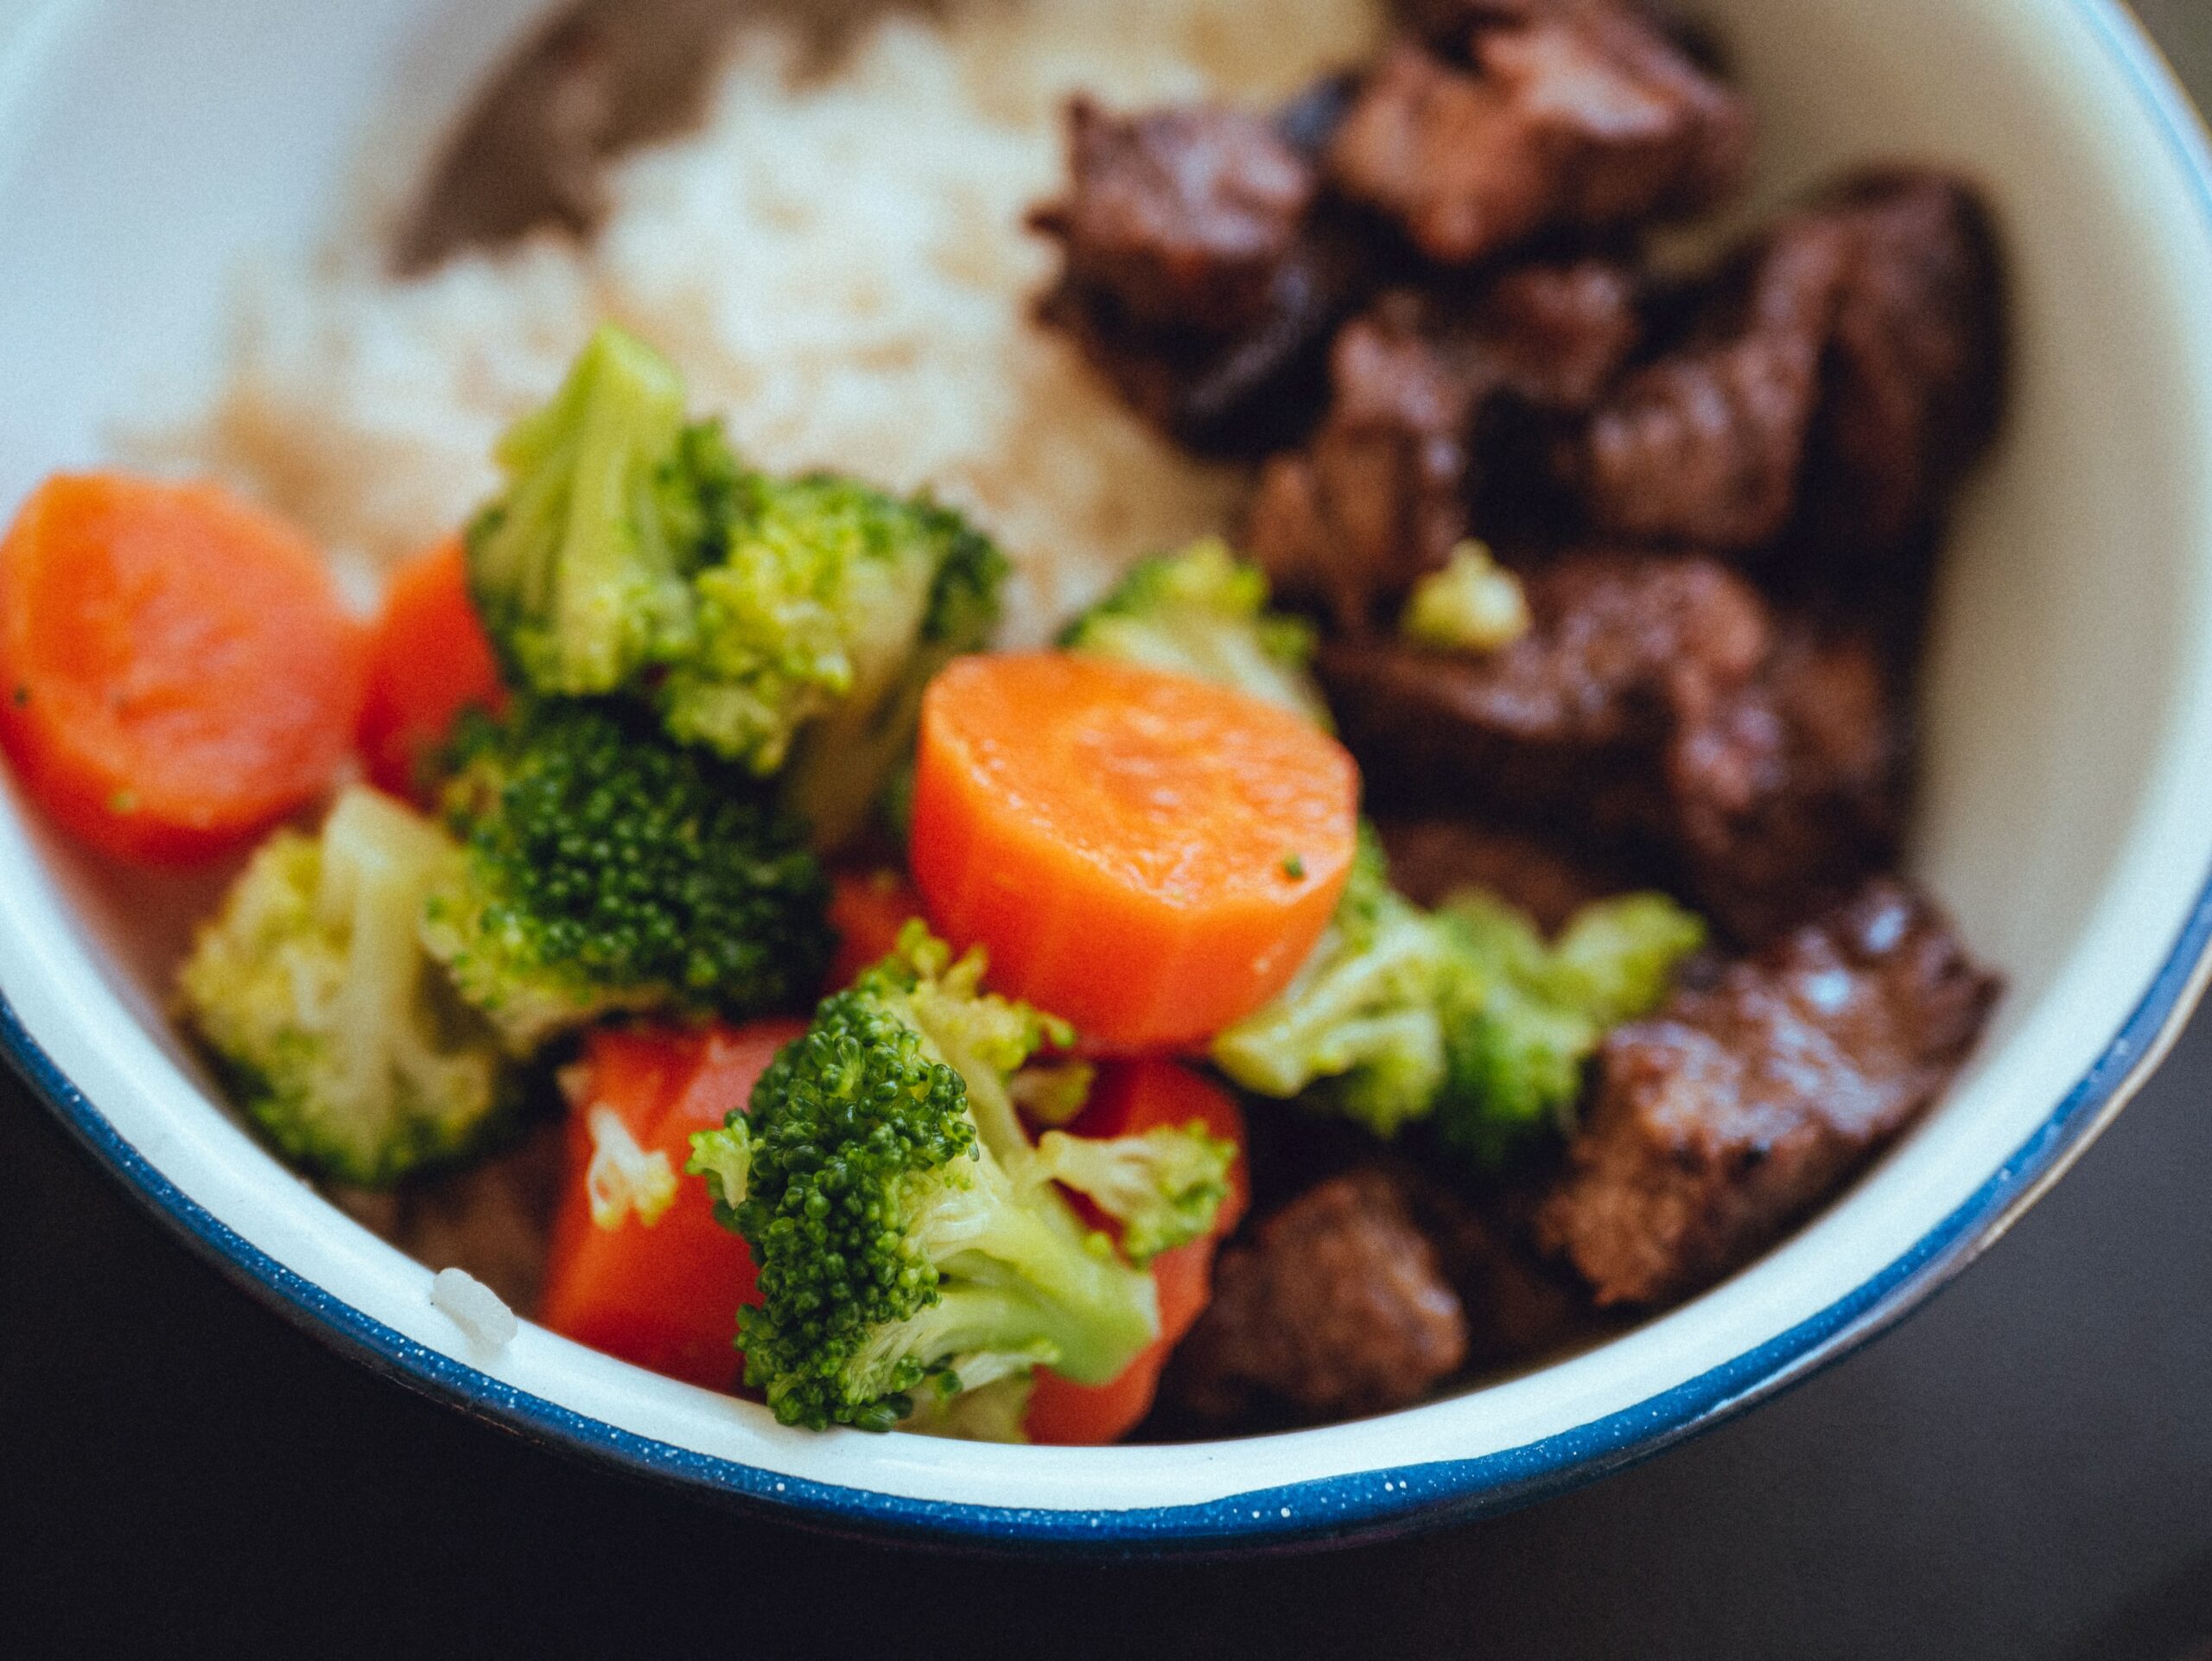 A bowl with vegetables, rice, and beef